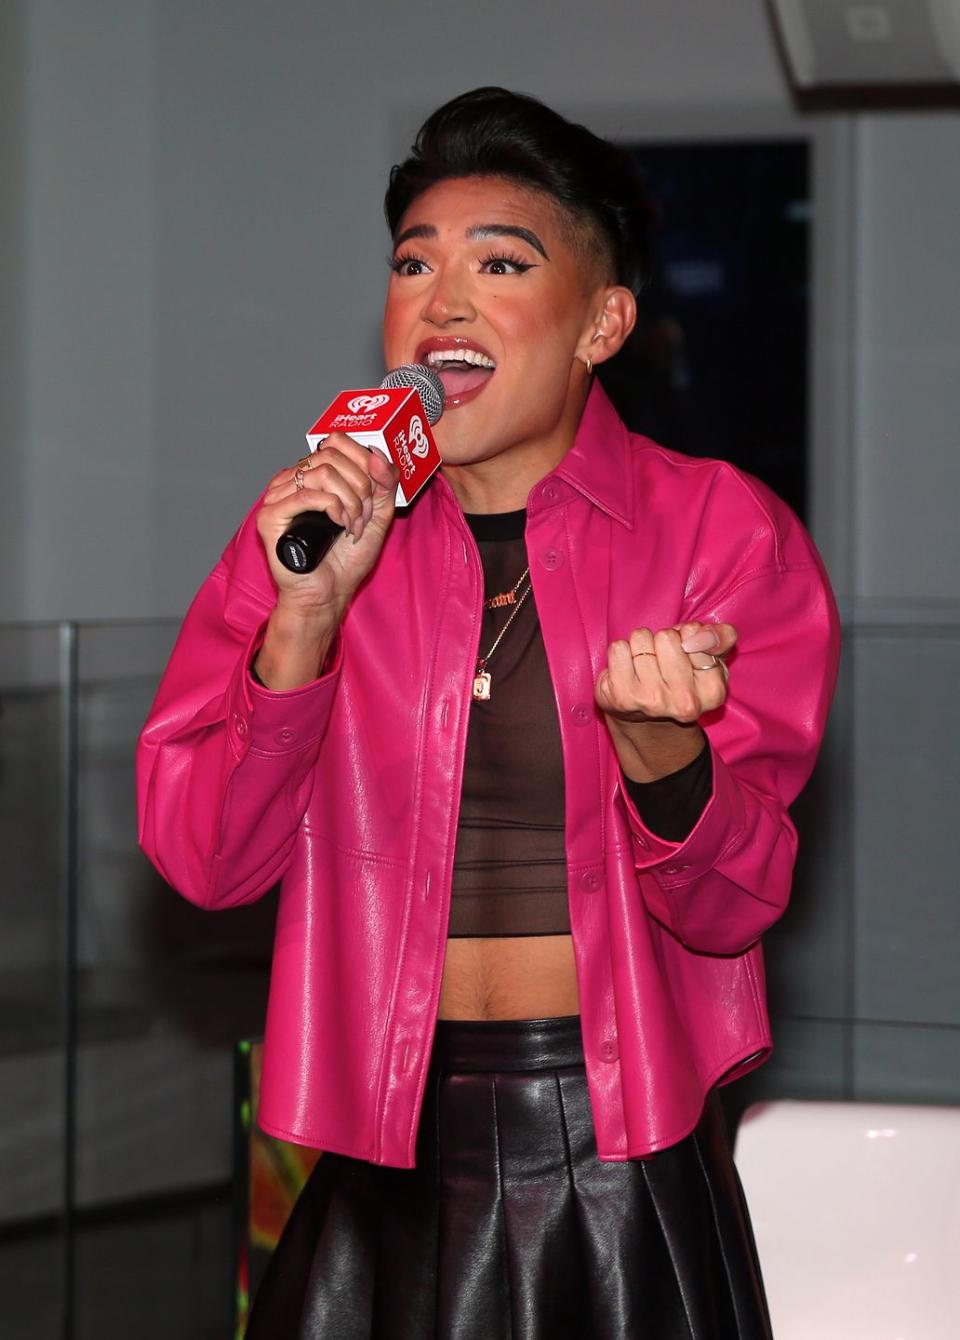 justin david sullivan, wearing a pink coat and black top, sings into a microphone